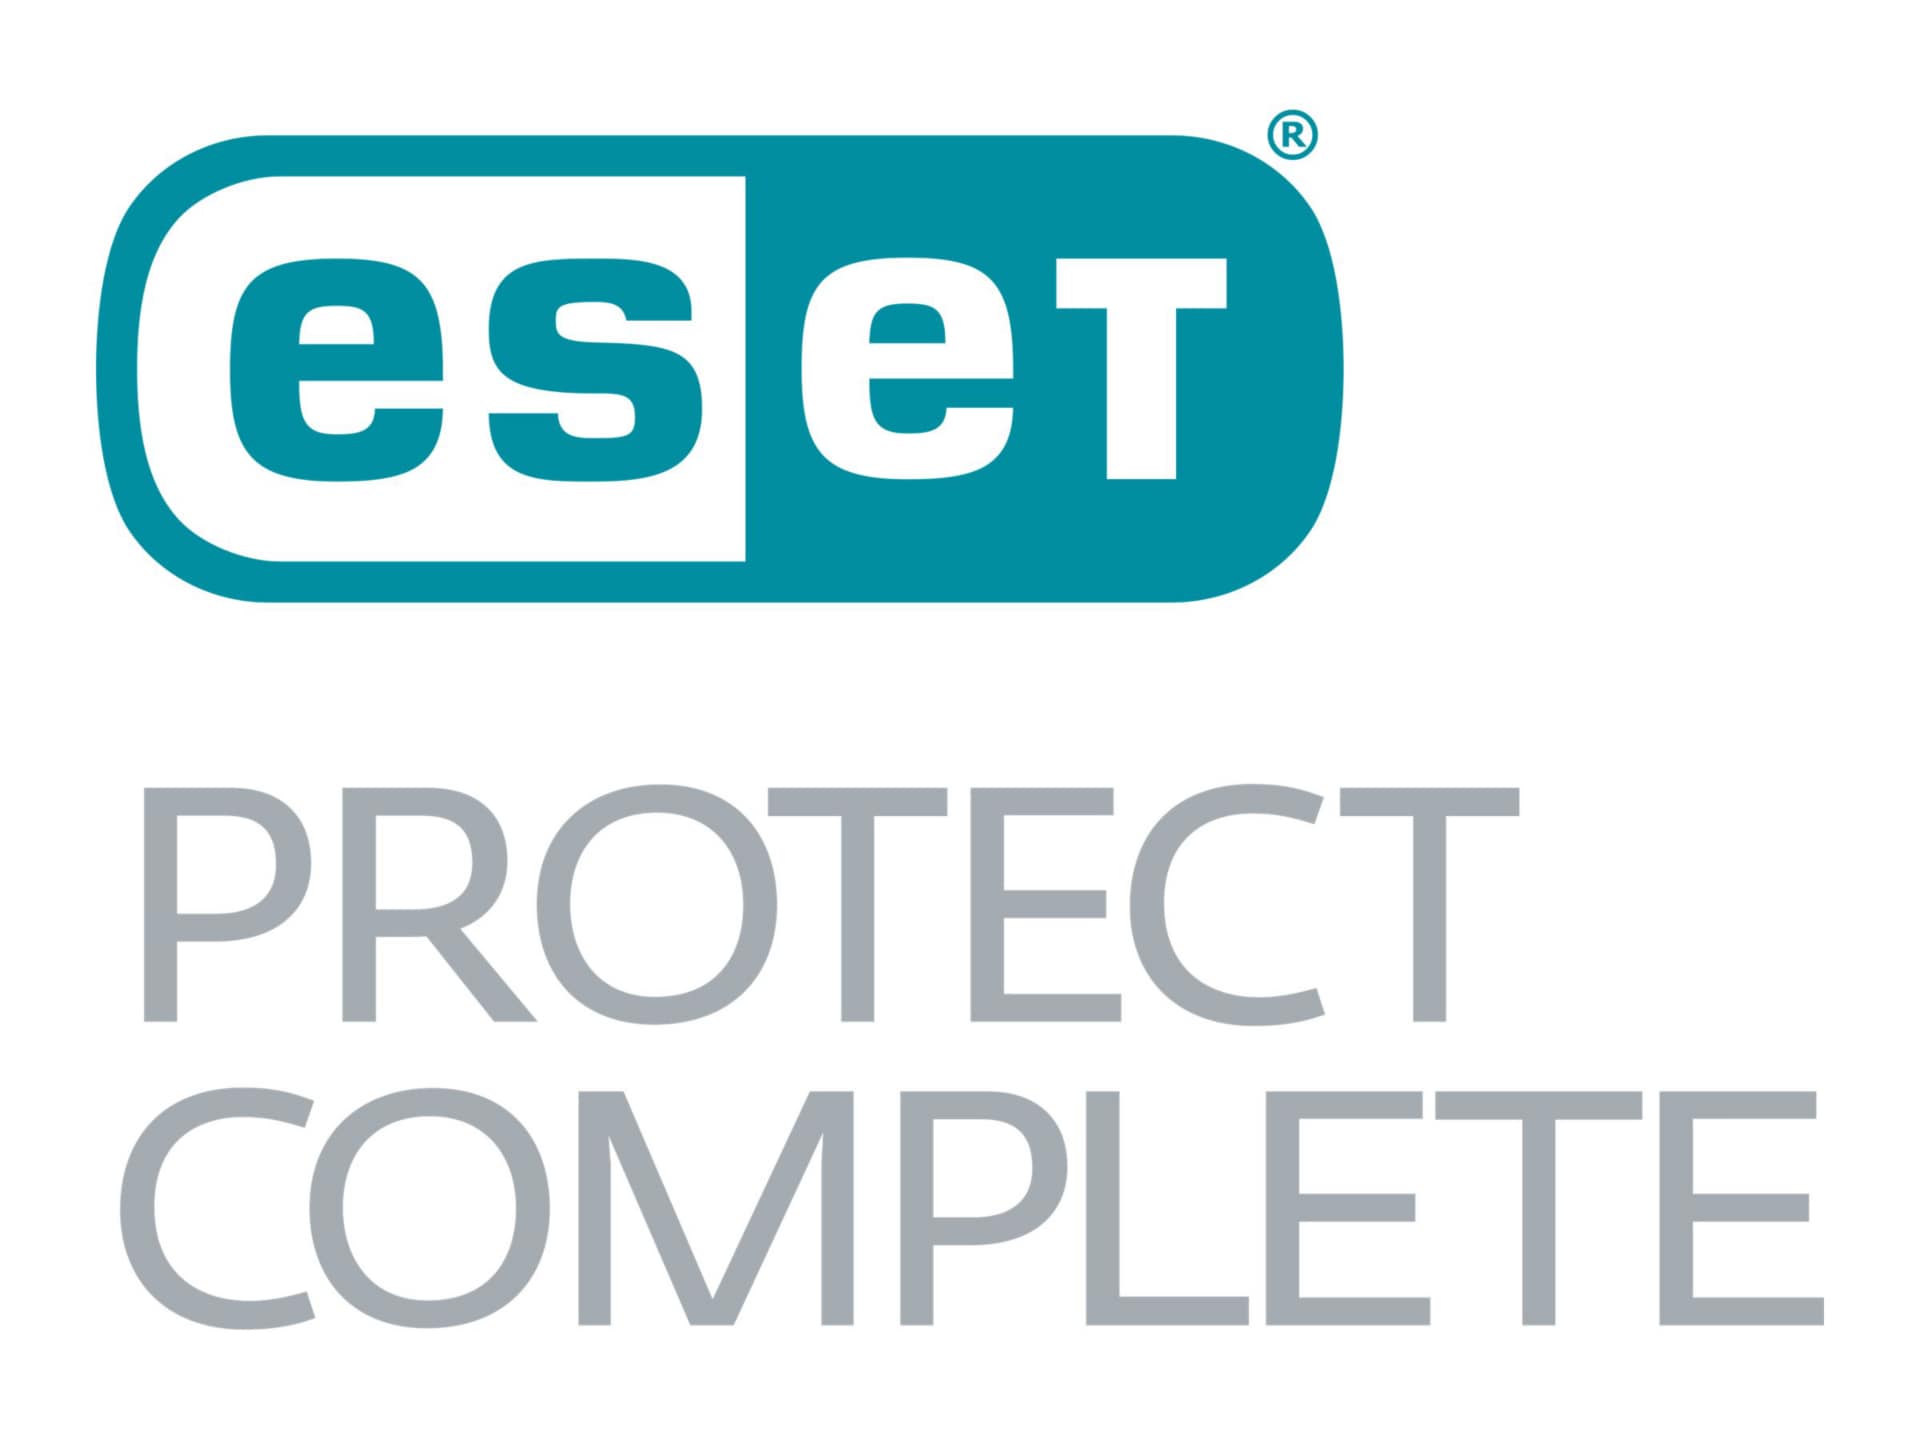 ESET PROTECT Complete - subscription license renewal (1 year) - 1 seat